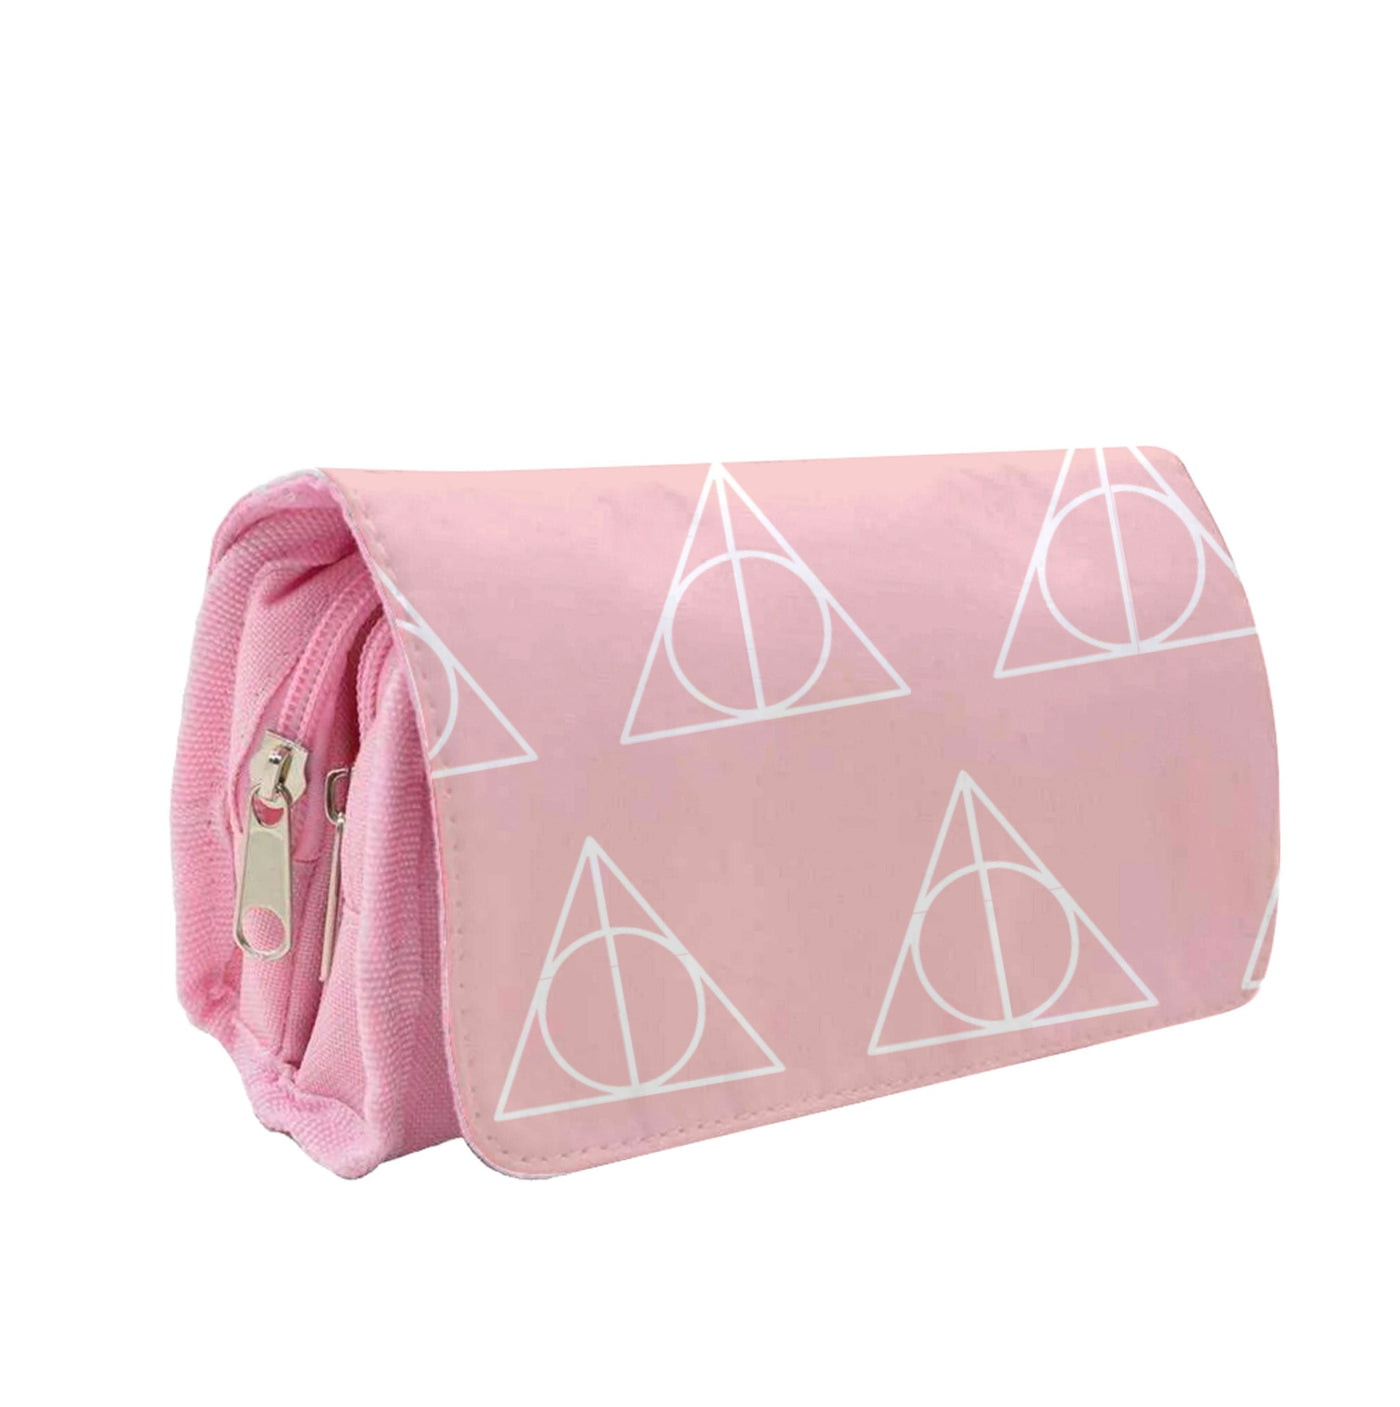 The Deathly Hallows Symbol Pattern - Harry Potter Pencil Case